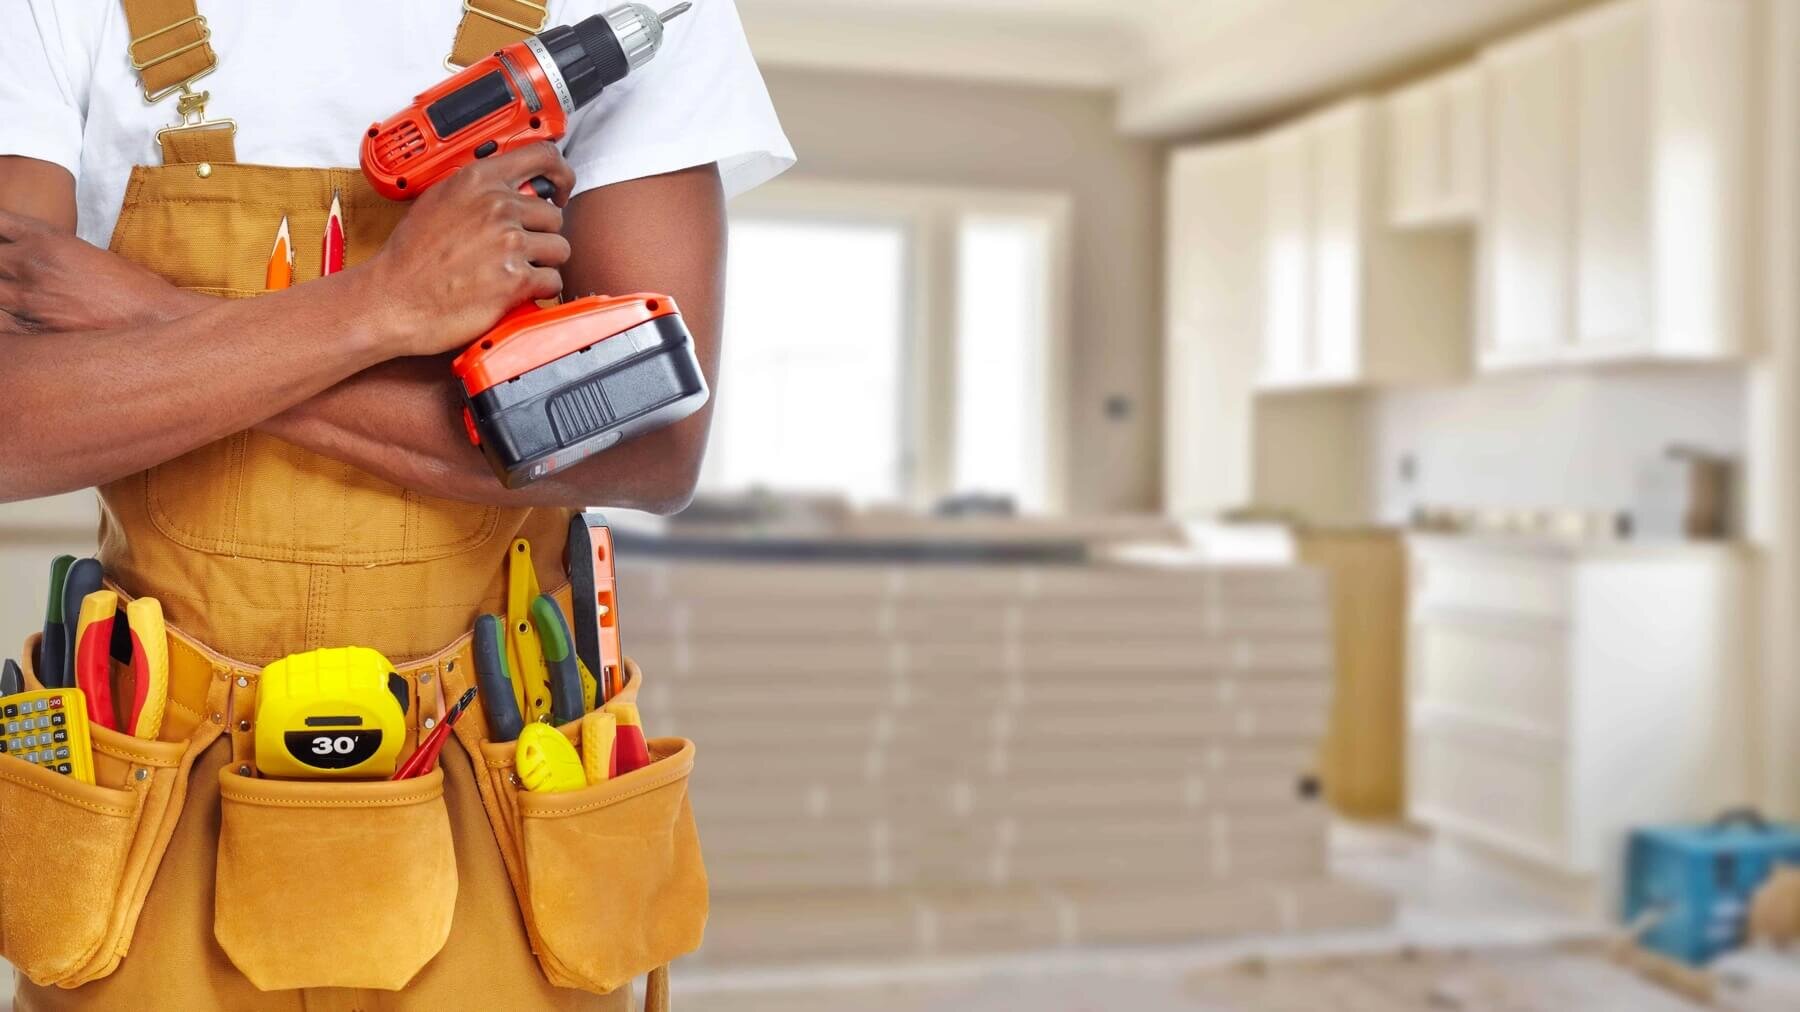 Get all the house work done without any hassle